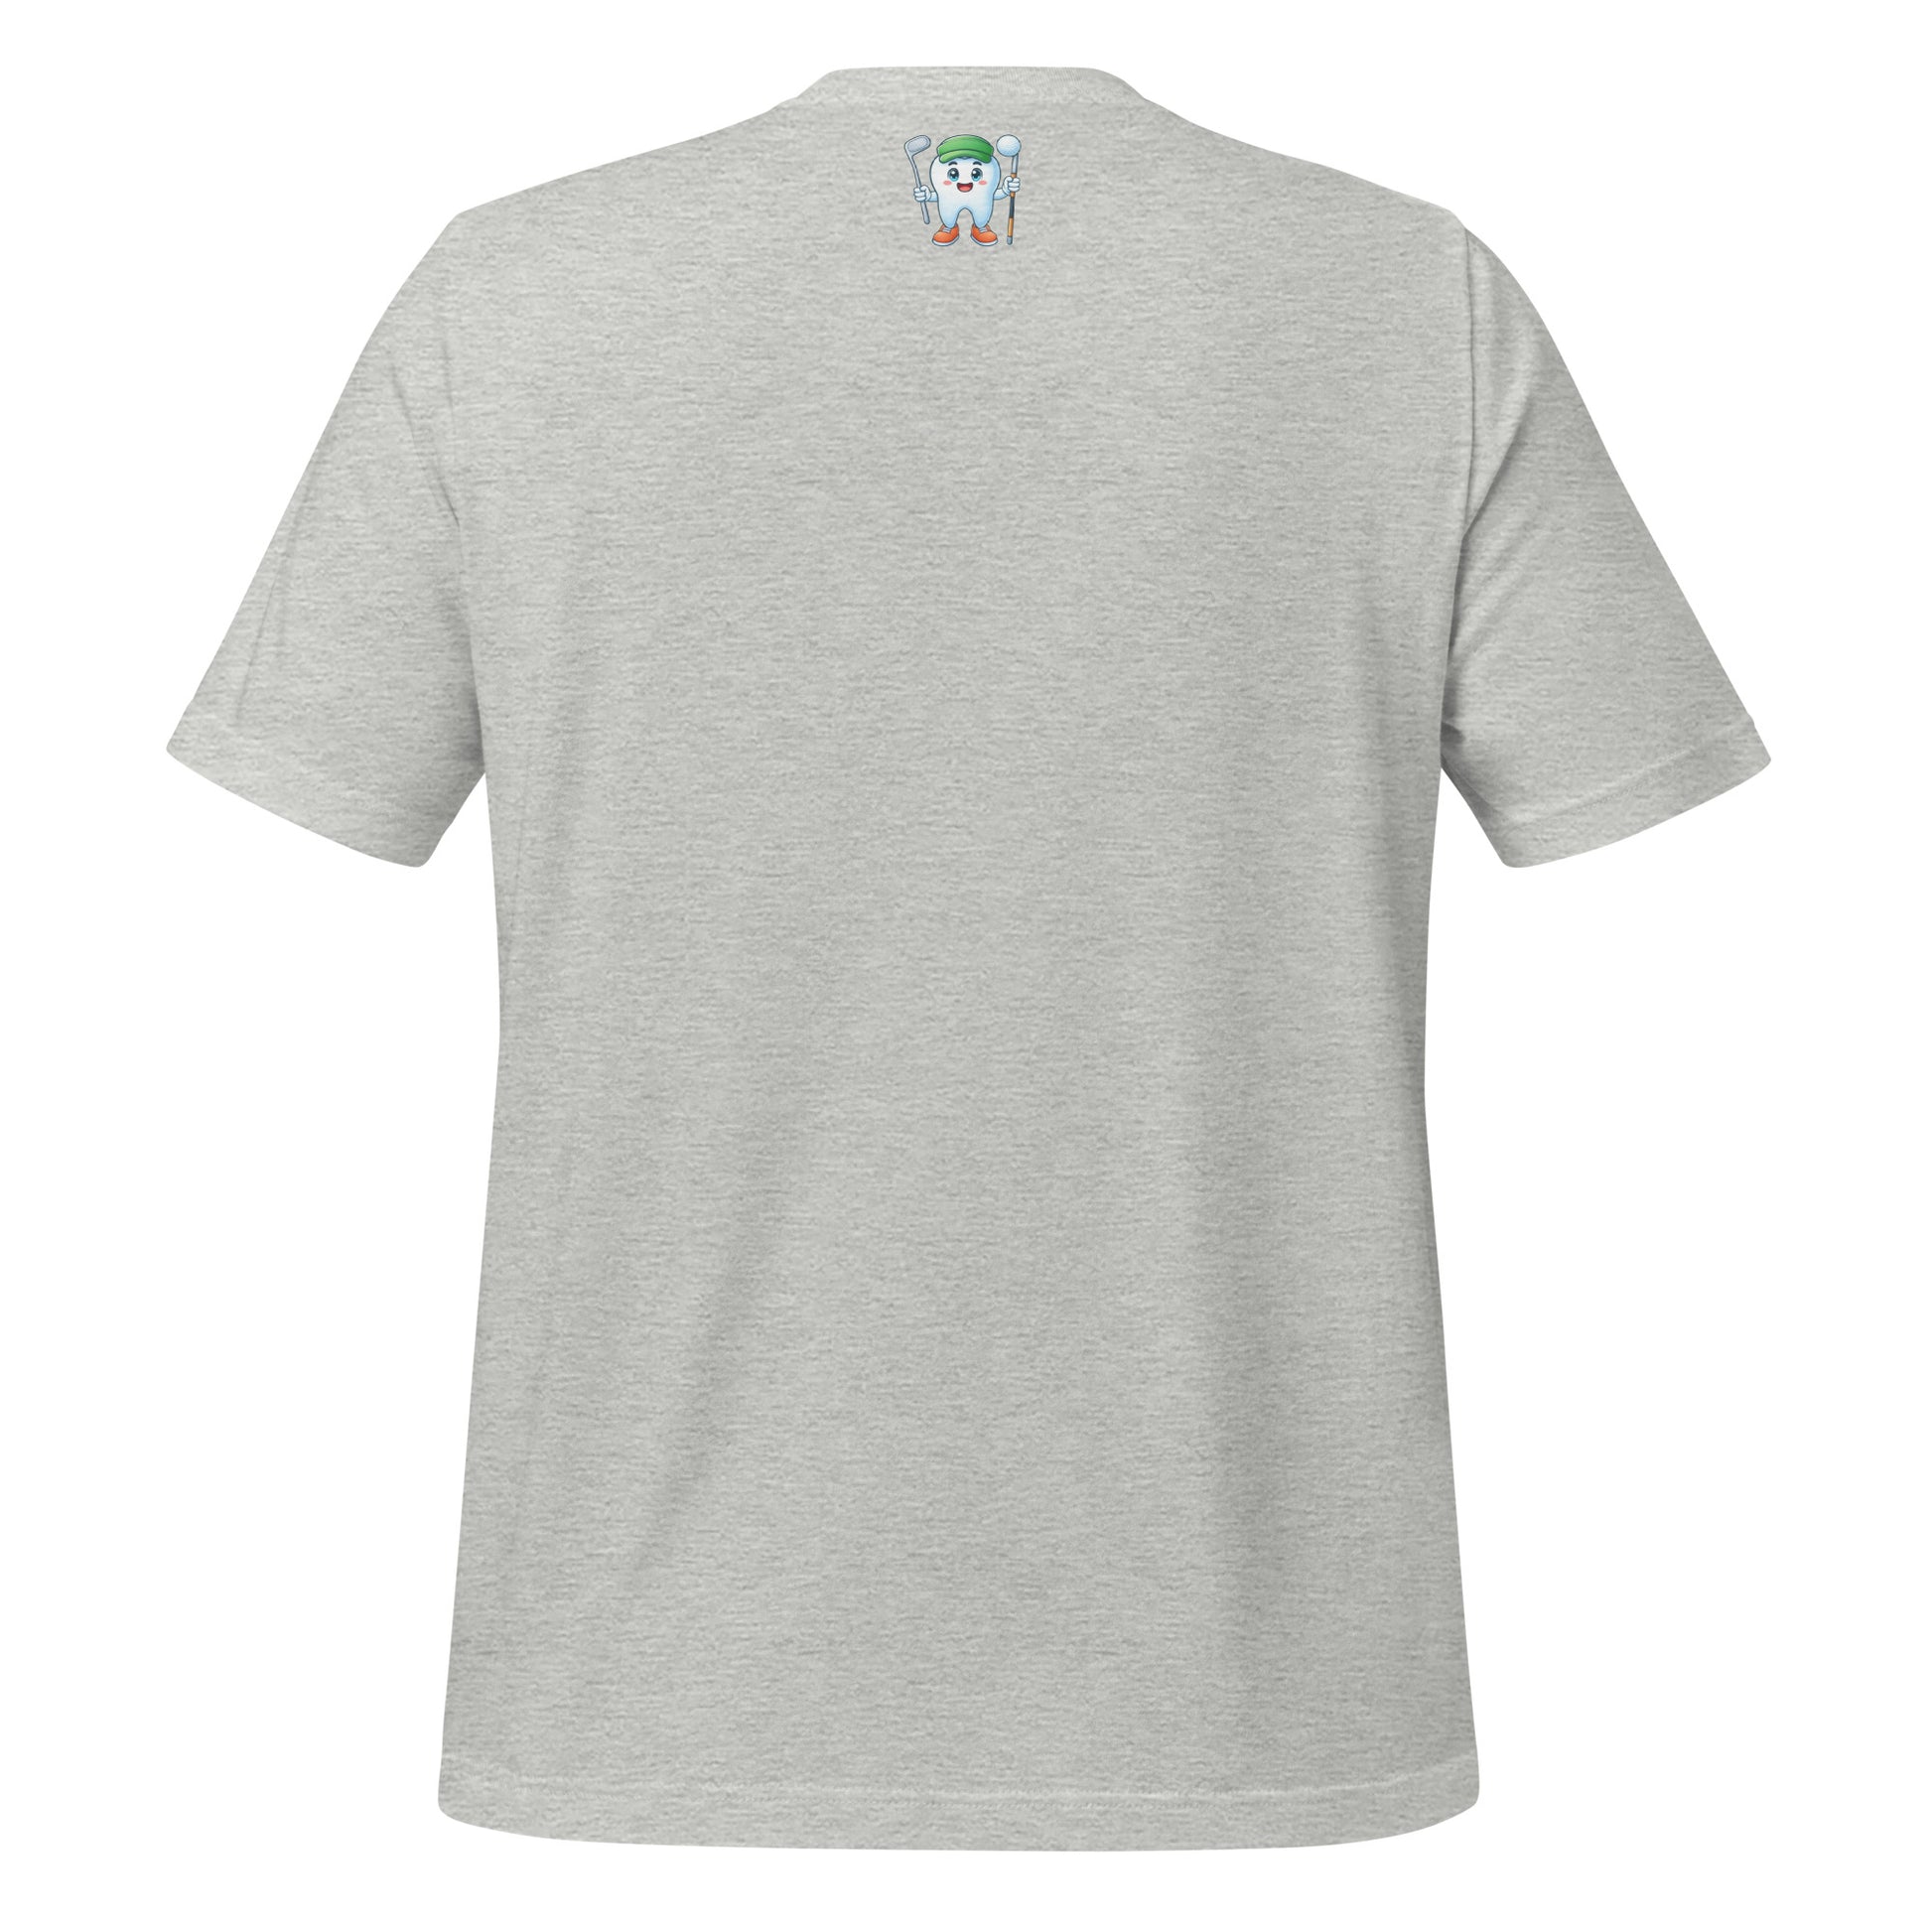 Cute dentist t-shirt showcasing an adorable tooth character in golf attire, joyfully celebrating a ‘hole in one’ achievement, perfect for dentist and dental professionals seeking unique and thematic dental apparel. Athletic heather color, back view.